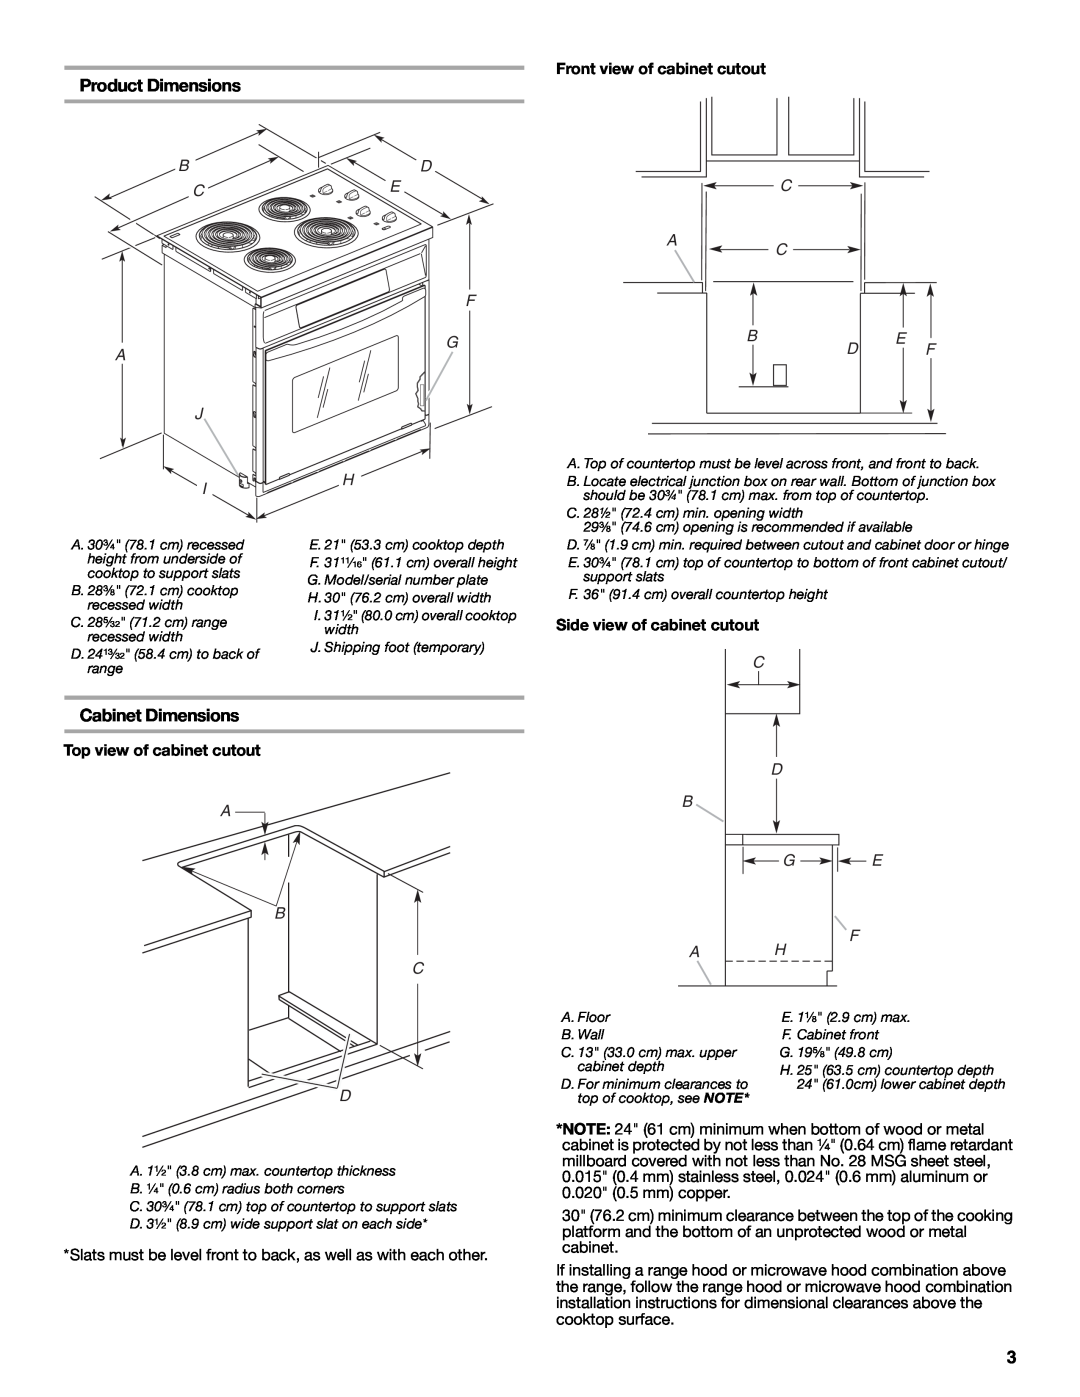 Whirlpool W10044940 Product Dimensions, Cabinet Dimensions, Front view of cabinet cutout, D E C, Gbd E F, A B C D 